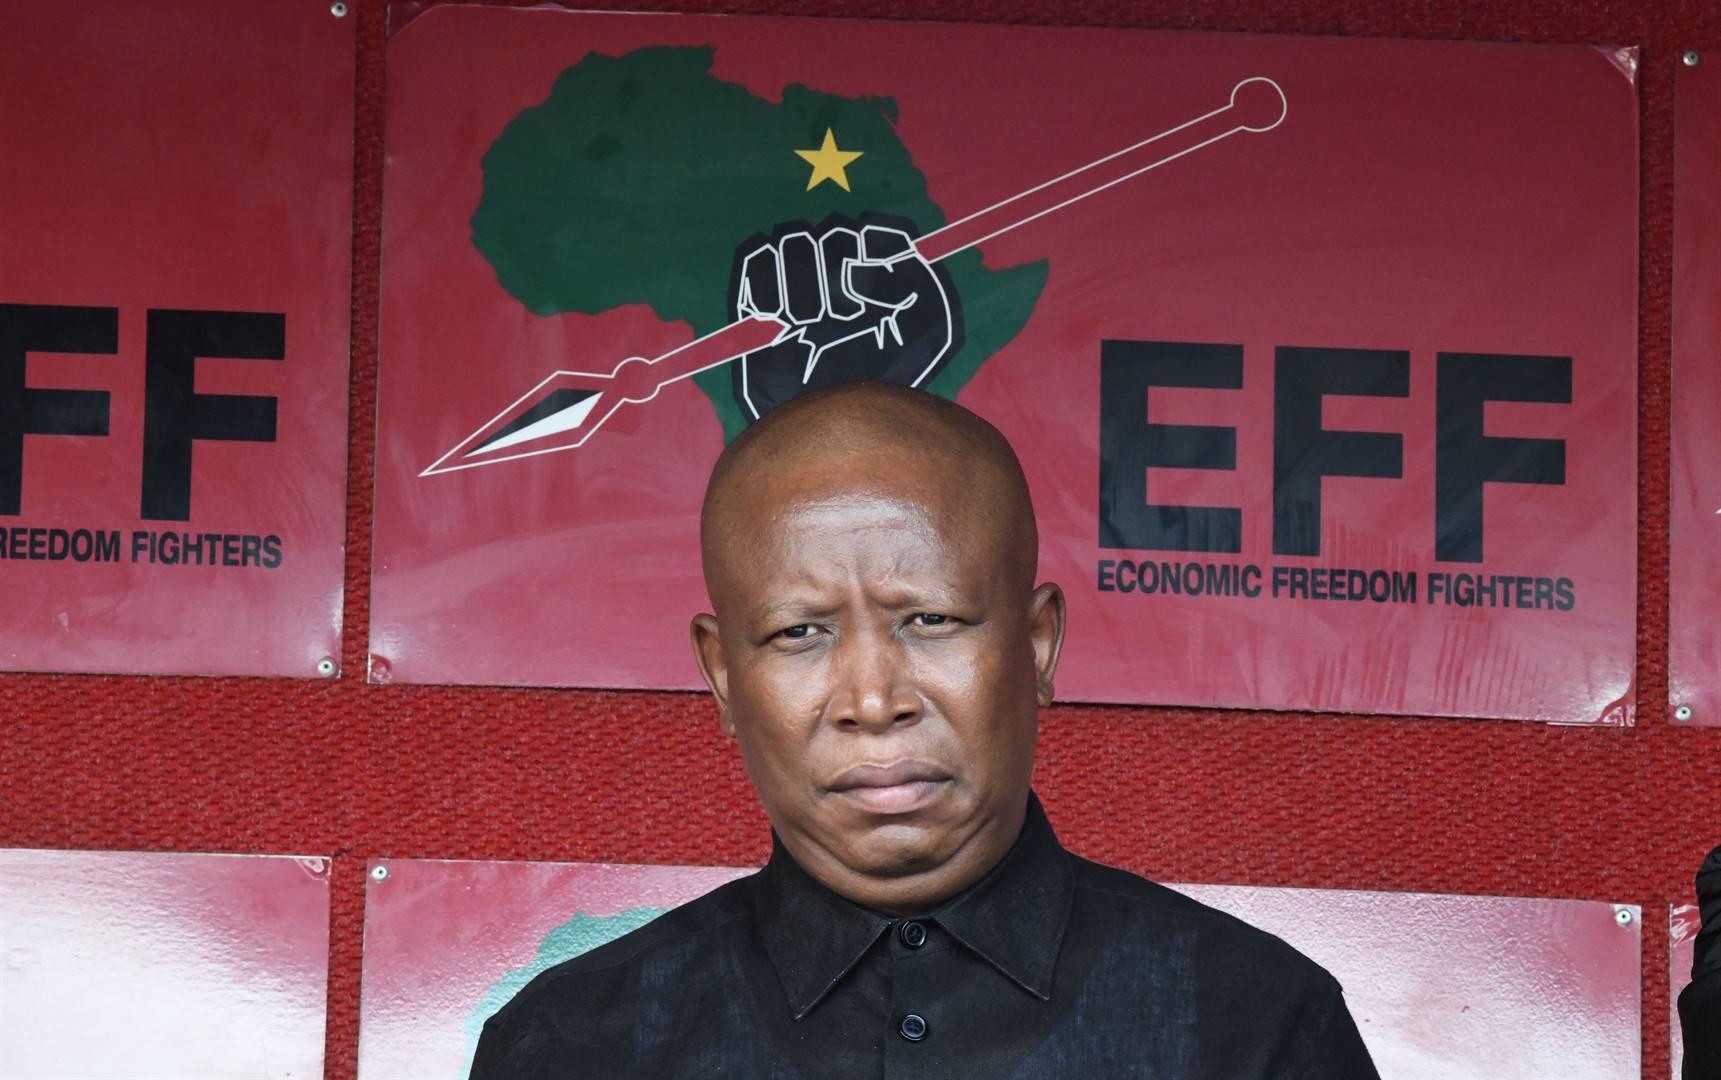 The Eff Is The Only Growing Organisation Says Proper Guy Malema News24